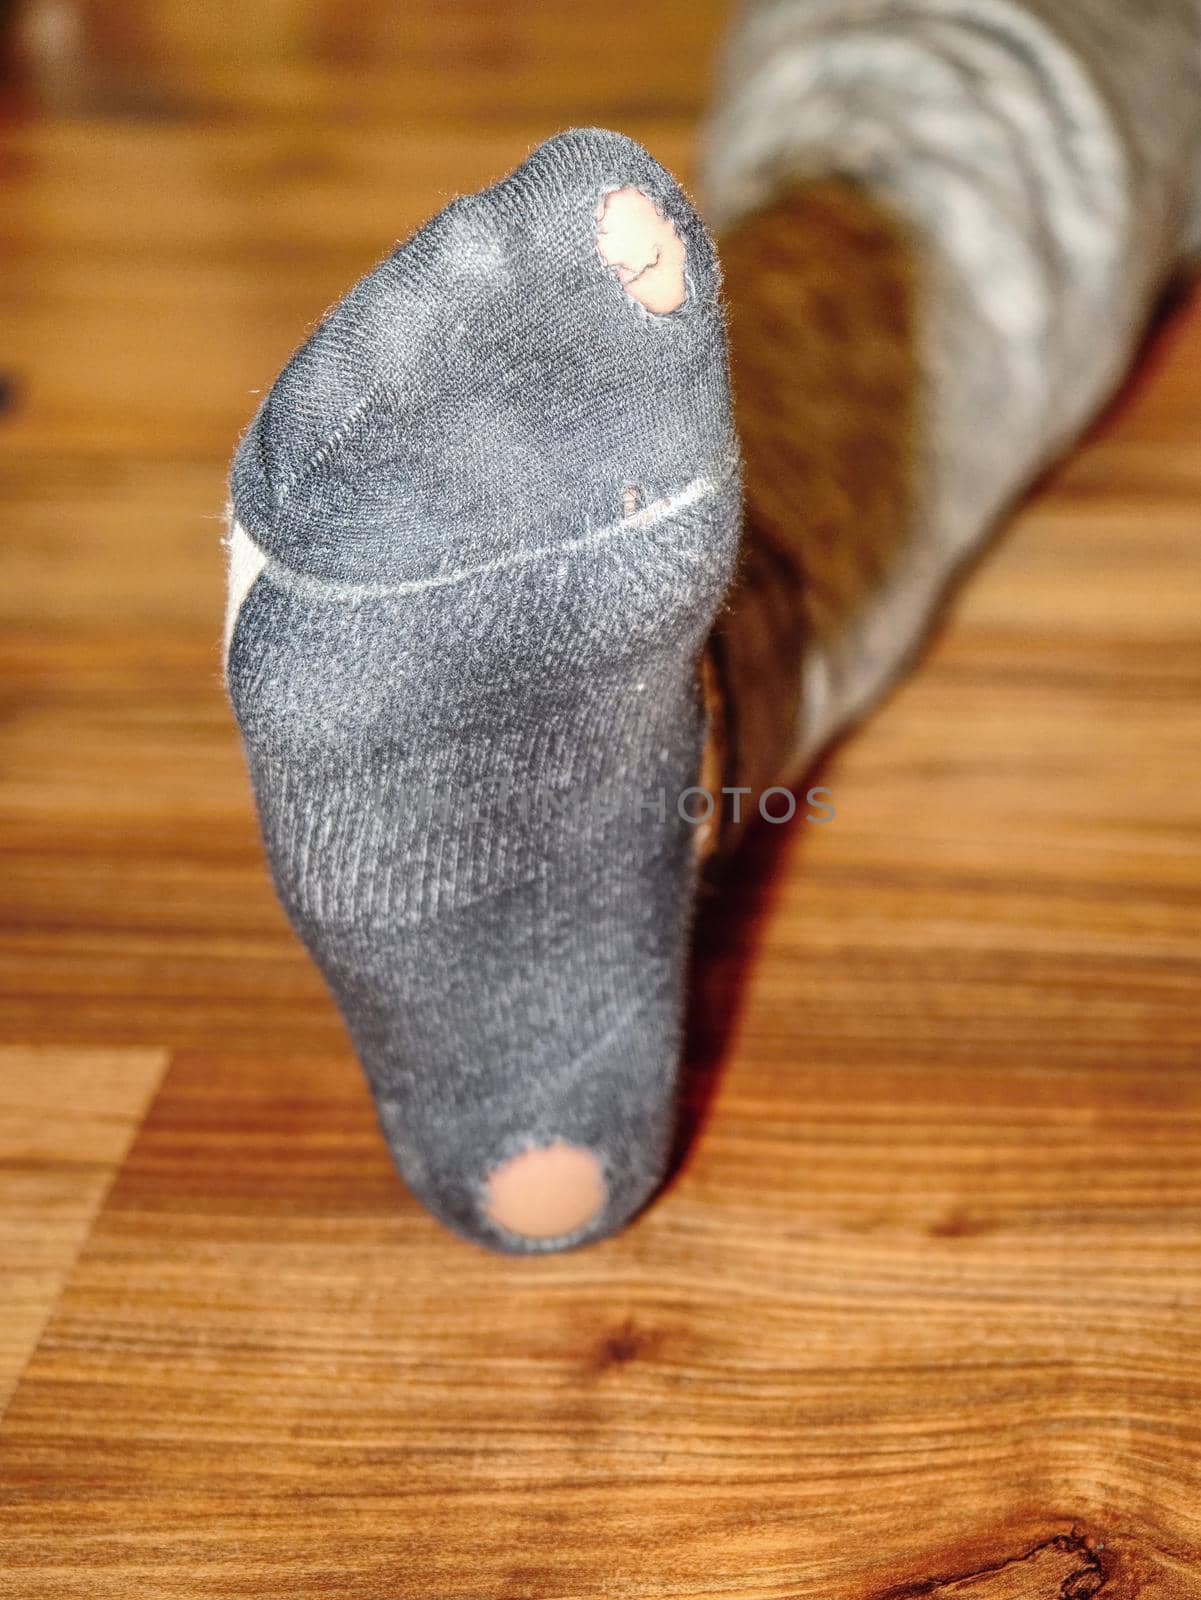 Worn out socks with holes and toes sticking out  by rdonar2